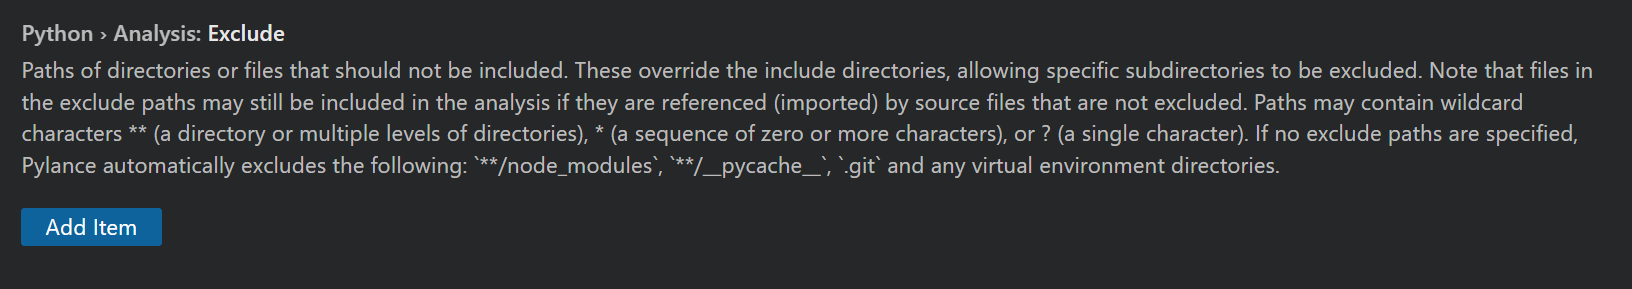 Description of the python.analysis.exclude setting as shown by in VS Code's setting UI page. 